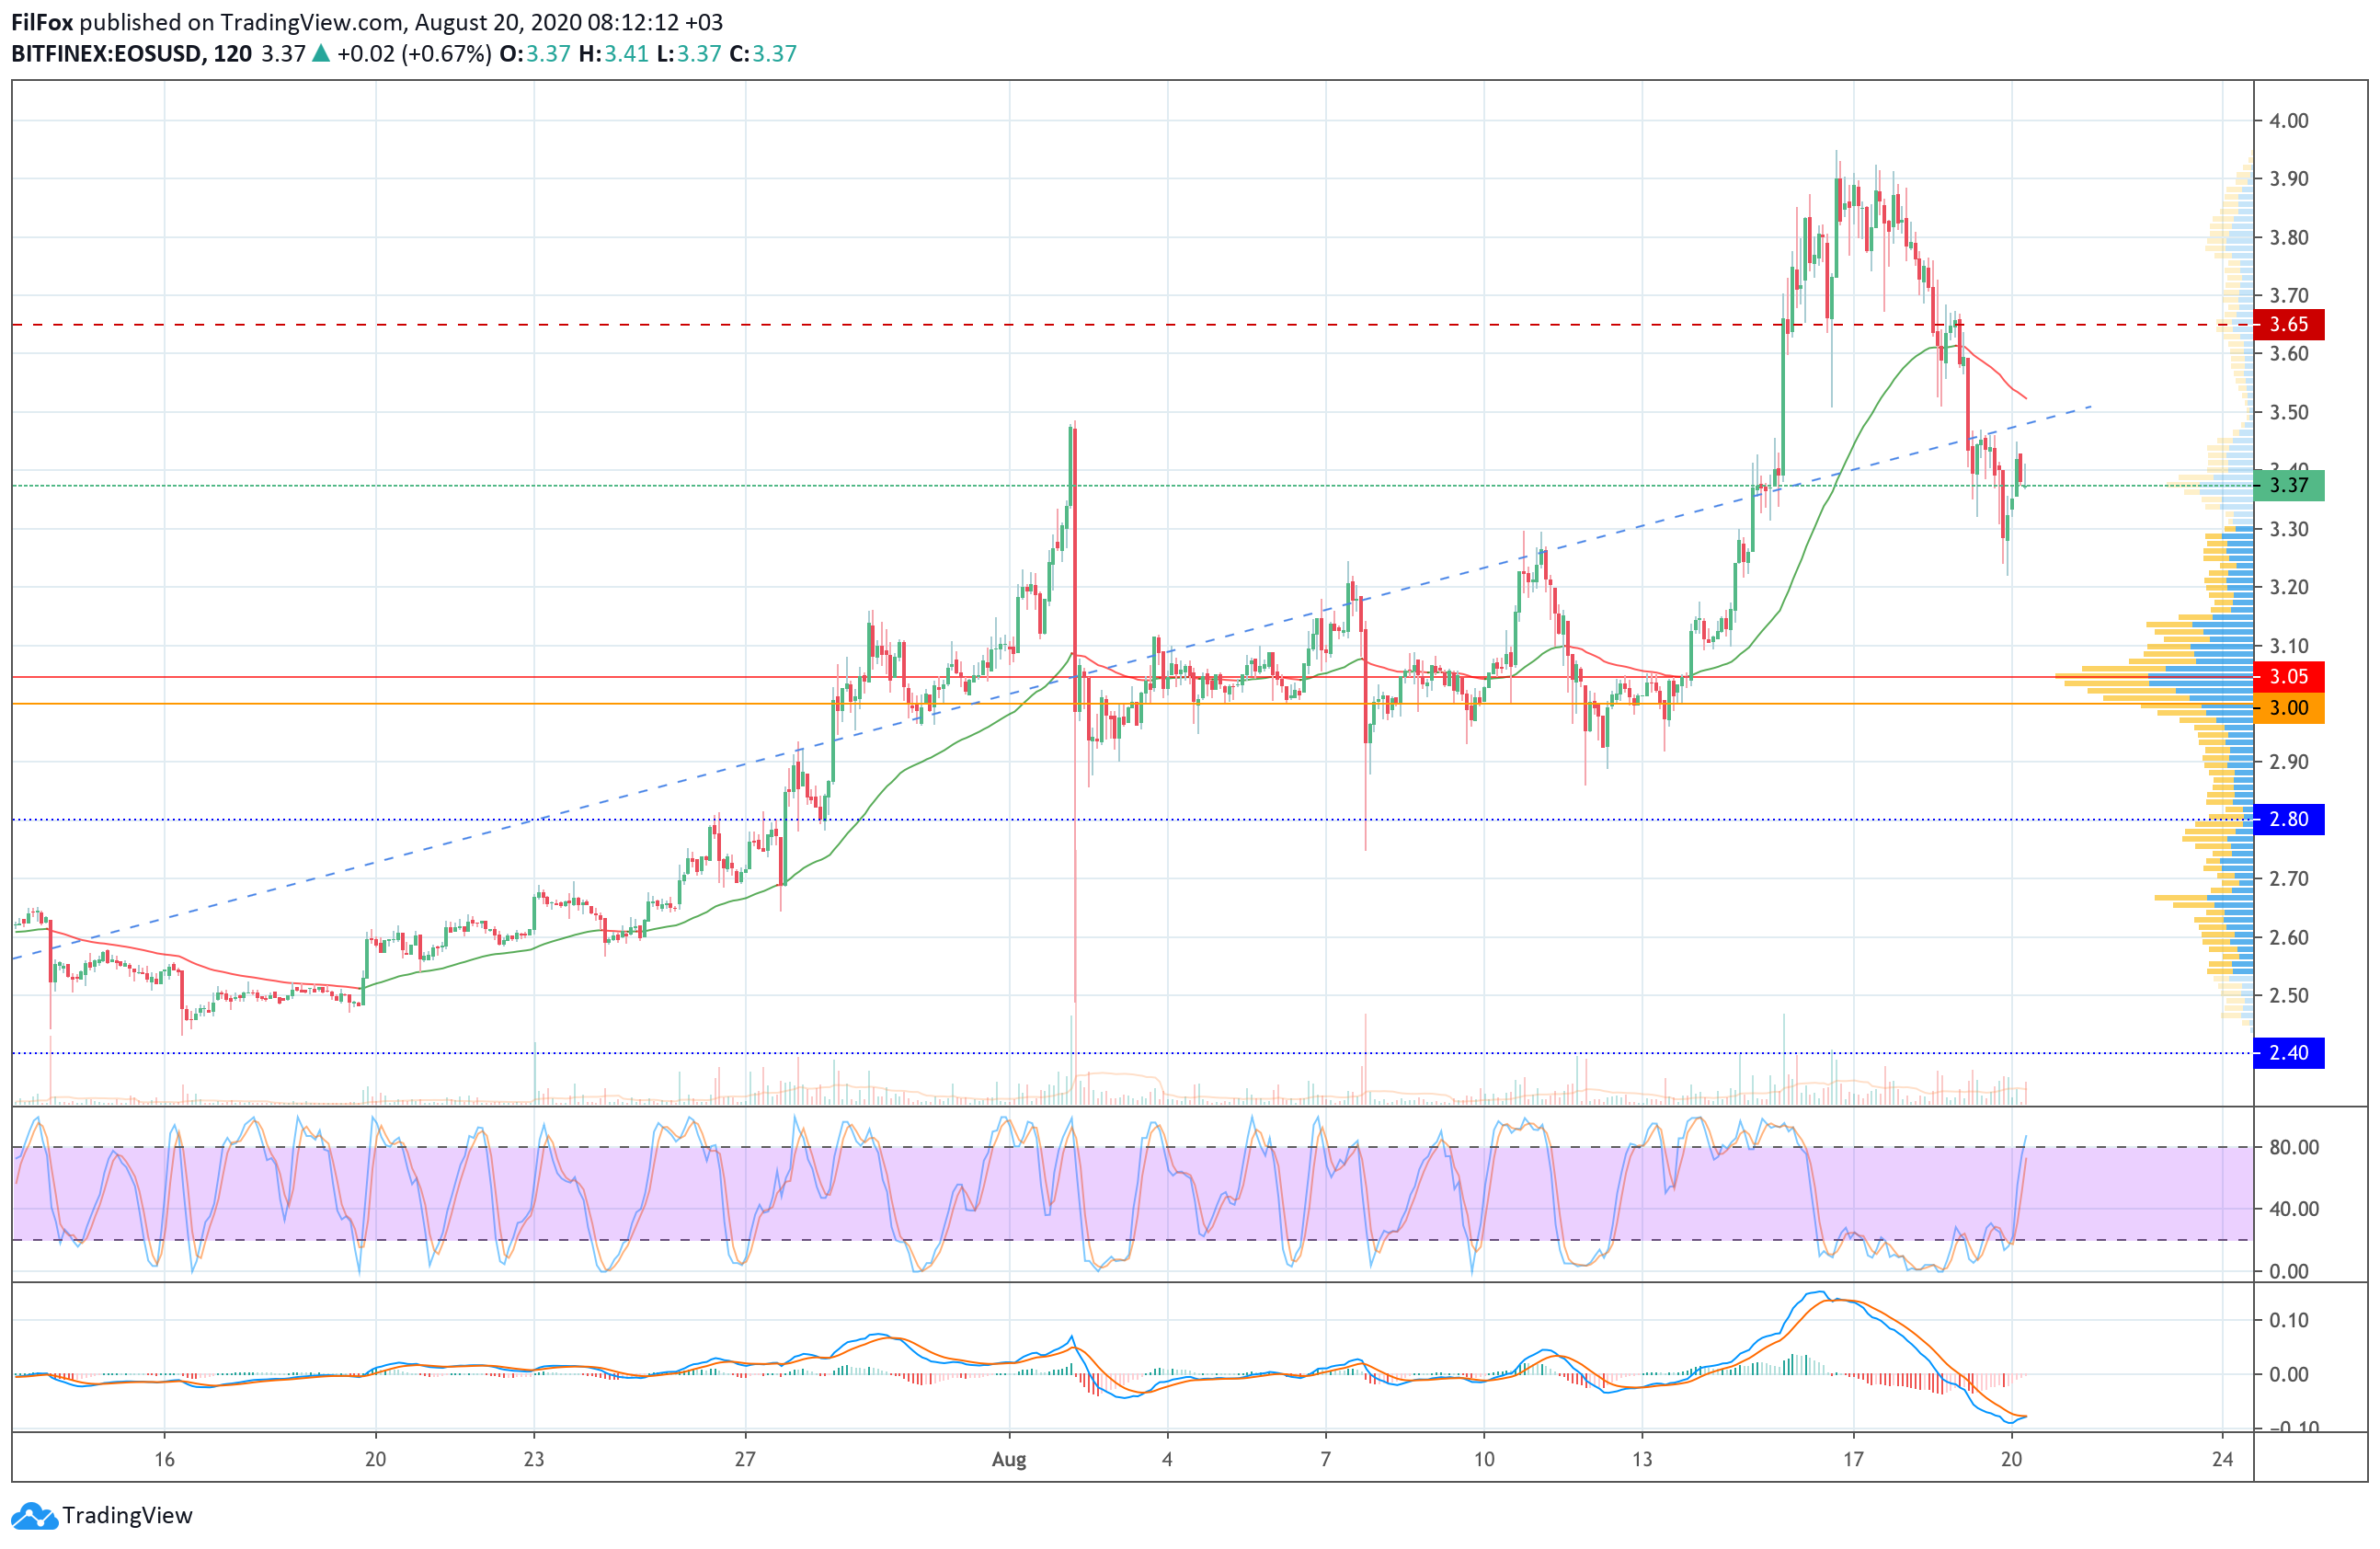 Analysis of the prices of ChainLink, Bitcoin Cash, Litecoin, Cardano, EOS and Stellar for 08/20/2020